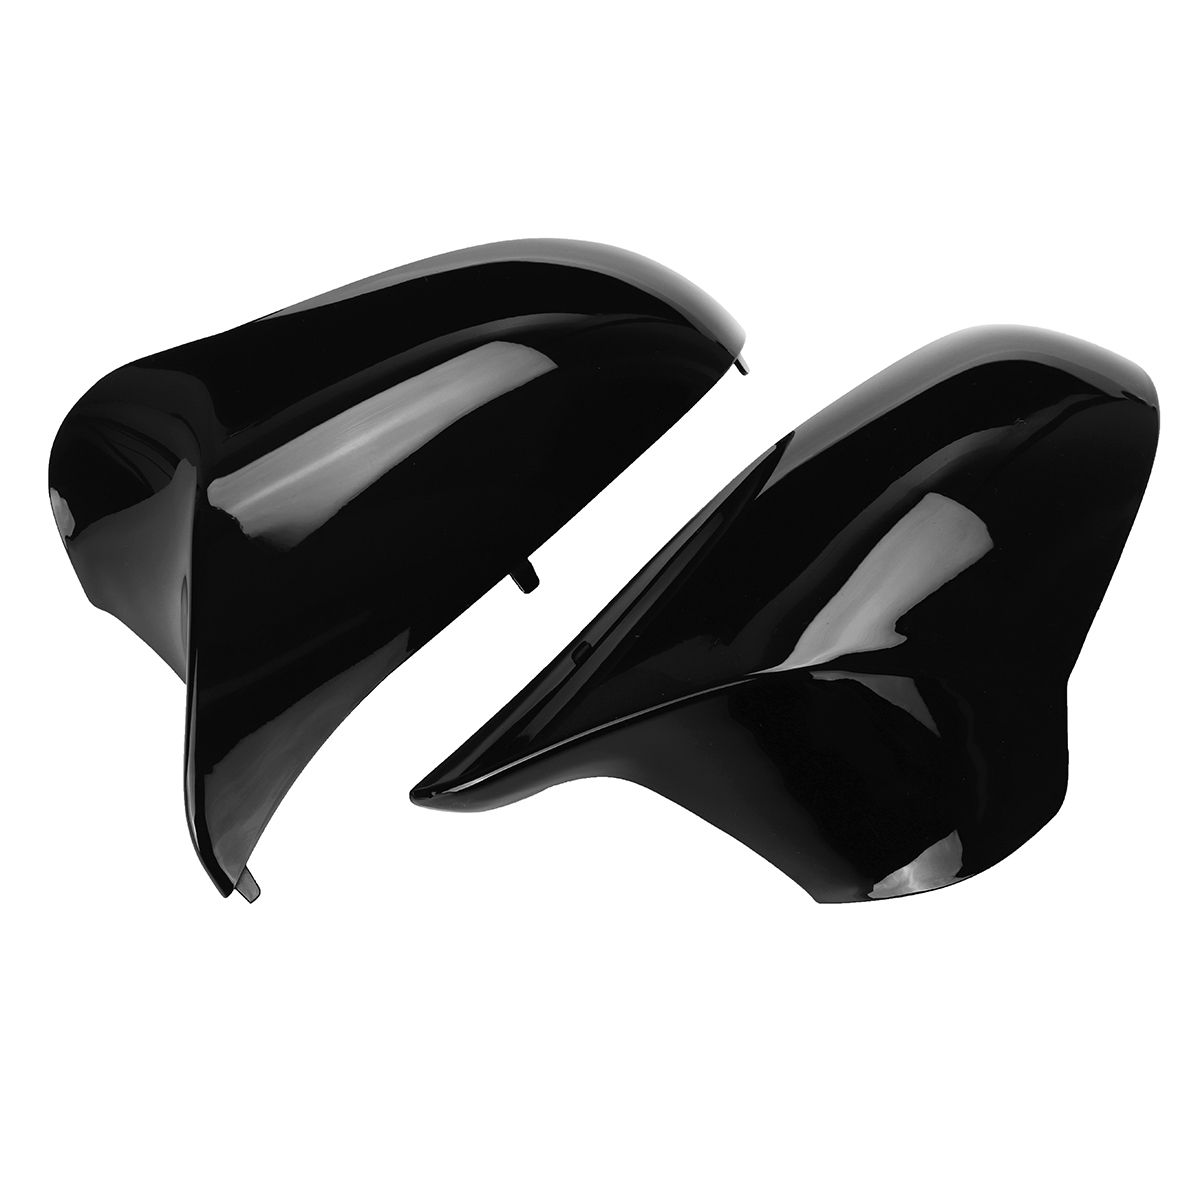 1Pair-Side-Mirror-Cover-Caps-Replace-Gloss-Black-For-BMW-F80-M3-F82-M4-2015-2018-1754892